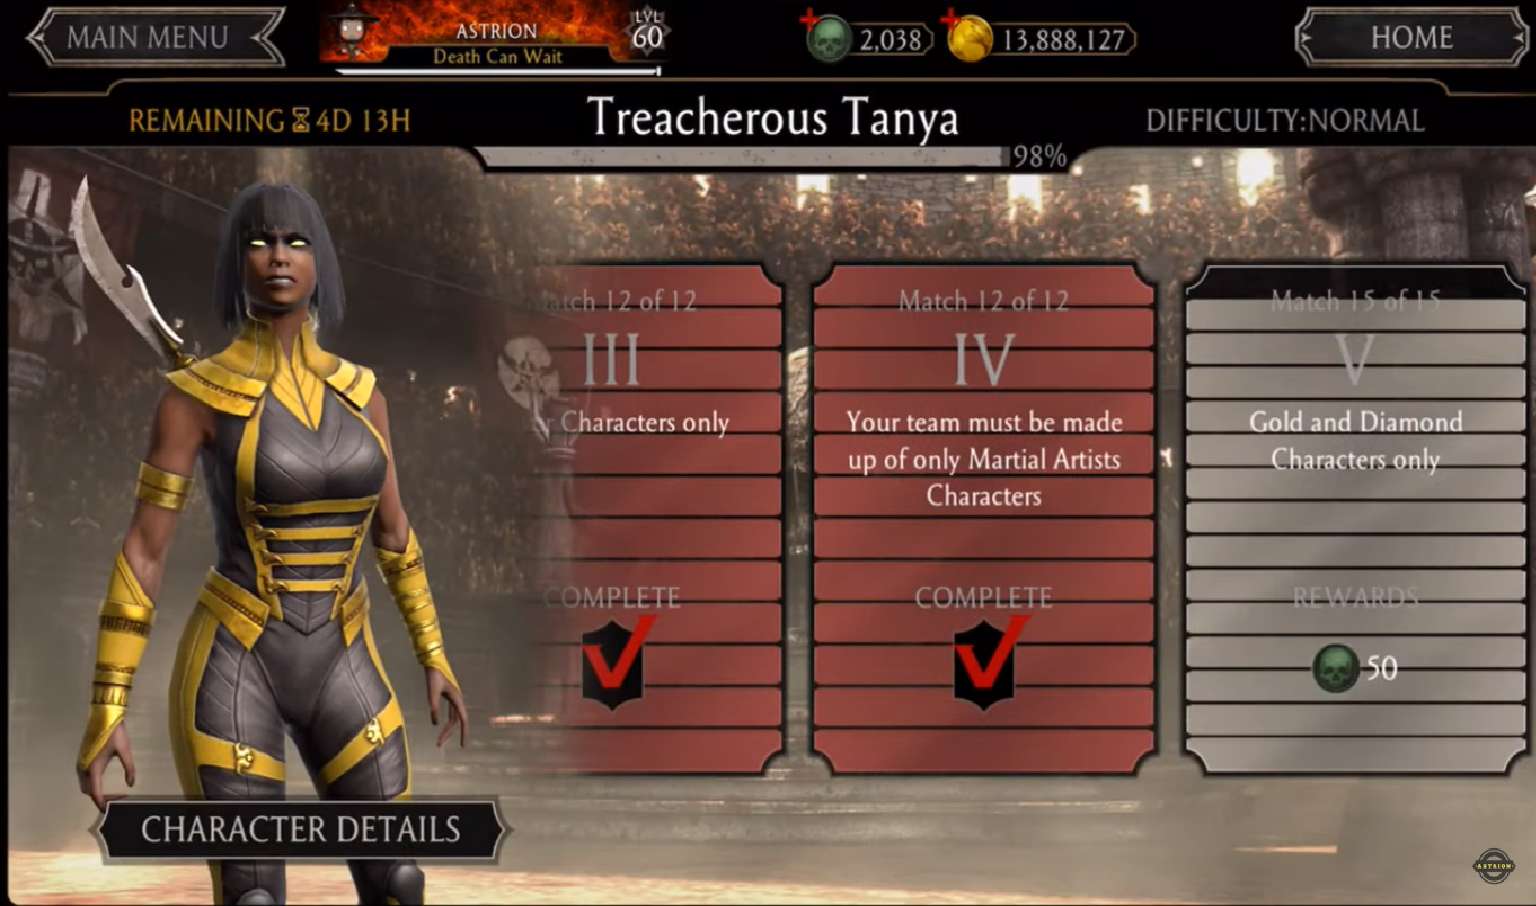 Treacherous Tanya Schemes Her Way Into A Weekly Tower In Mortal Kombat Mobile